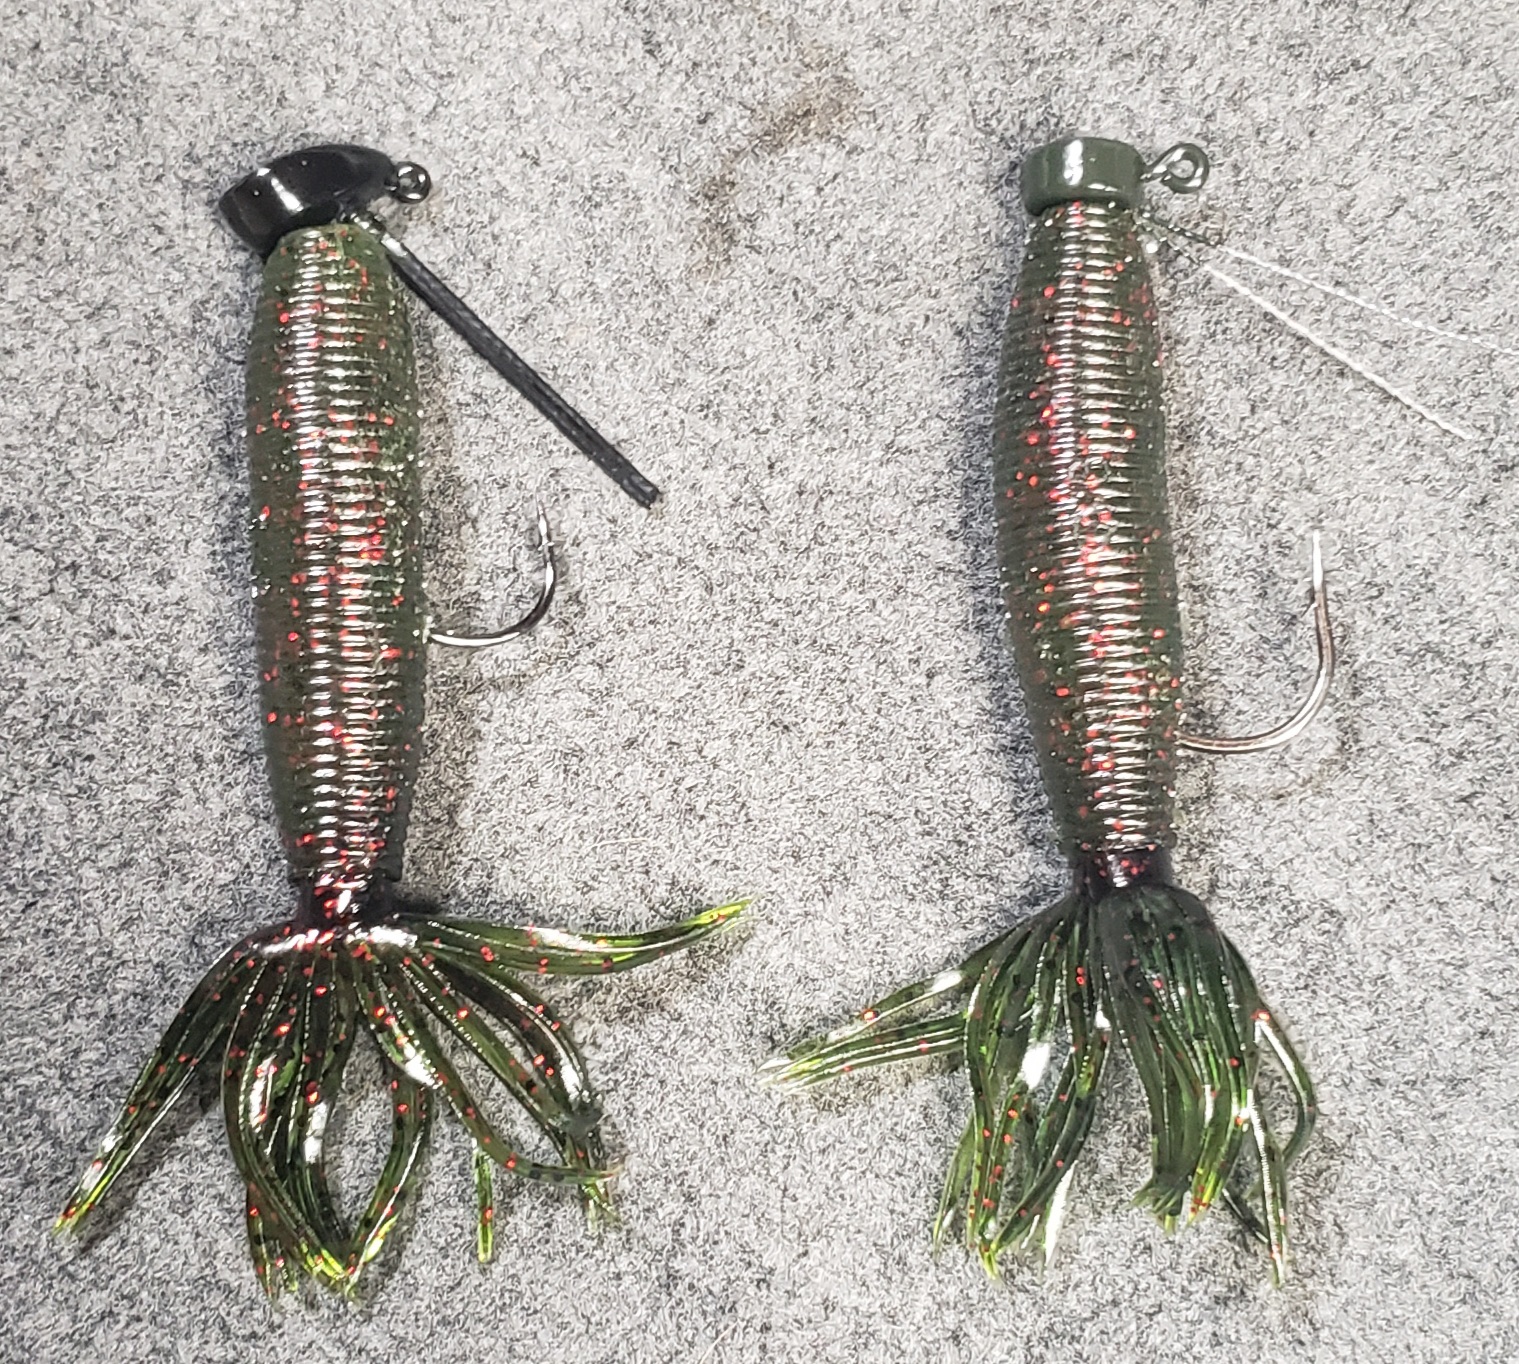 Yum Lures Ned Craw Brown Orange, One Size  